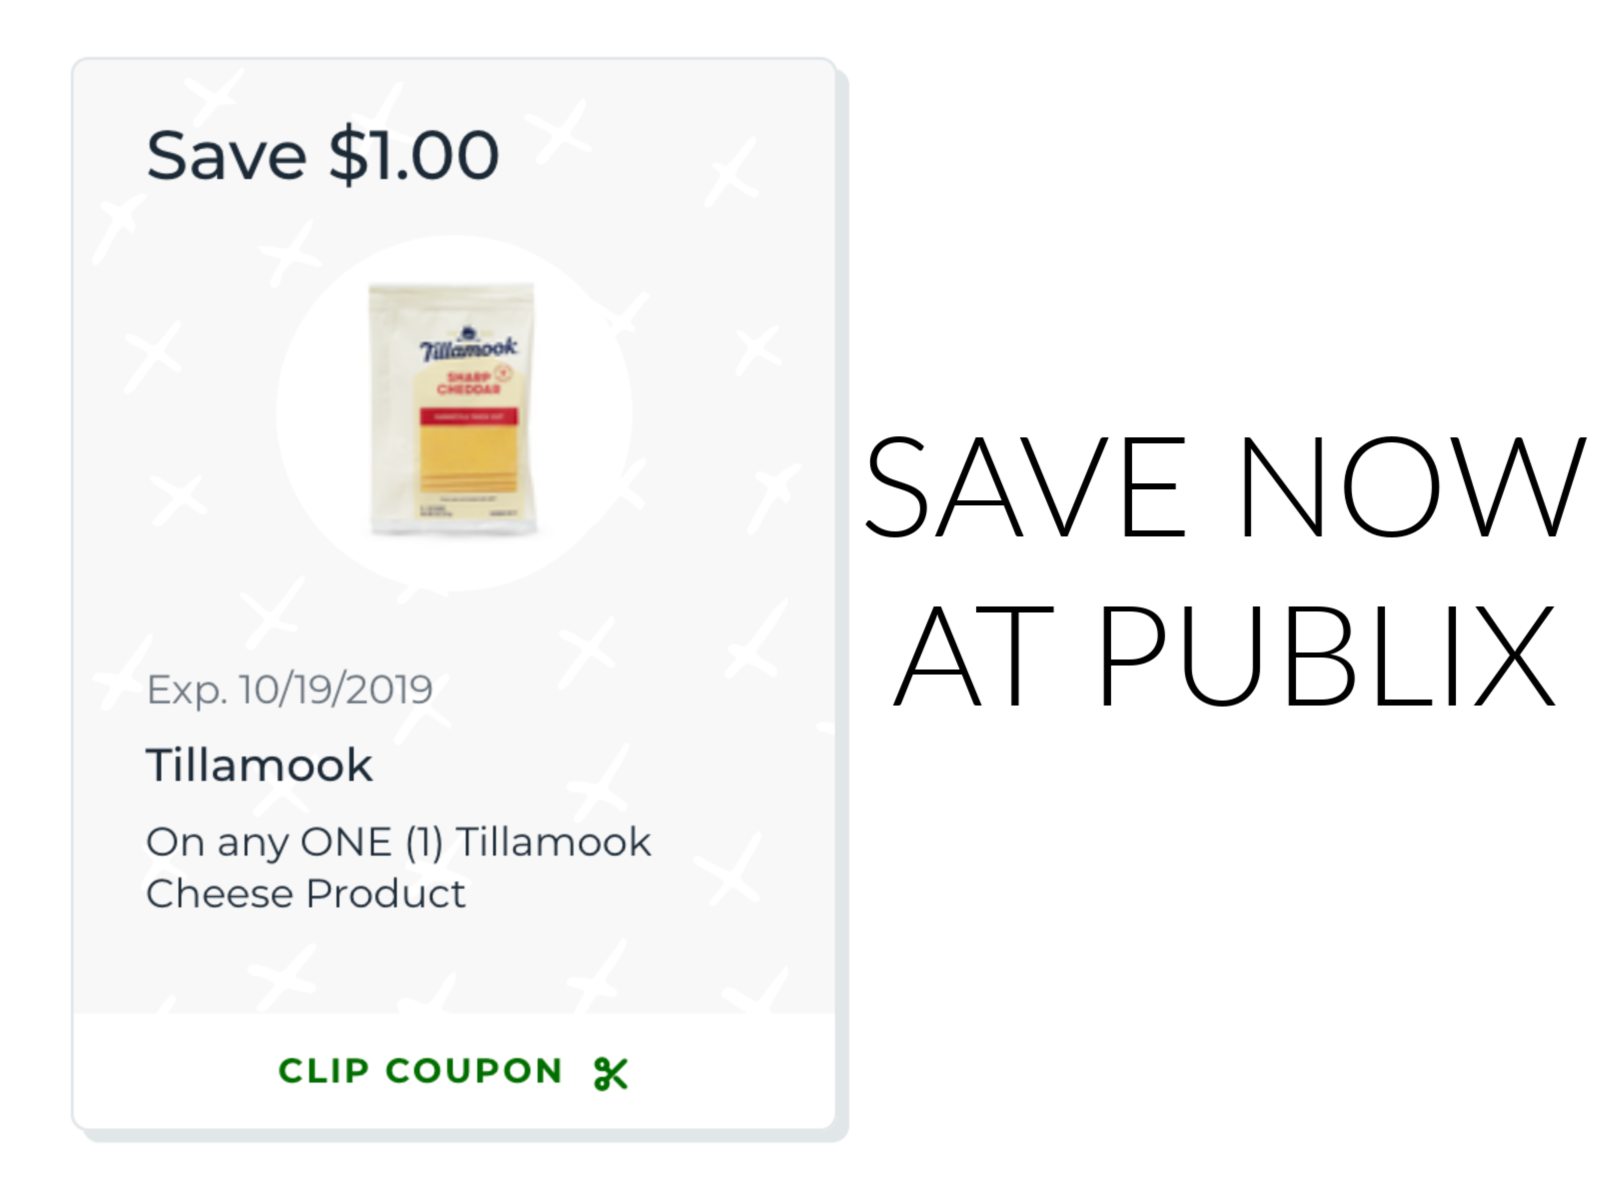 Don’t Miss Your Chance To Save On Delicious Tillamook Cheese At Publix